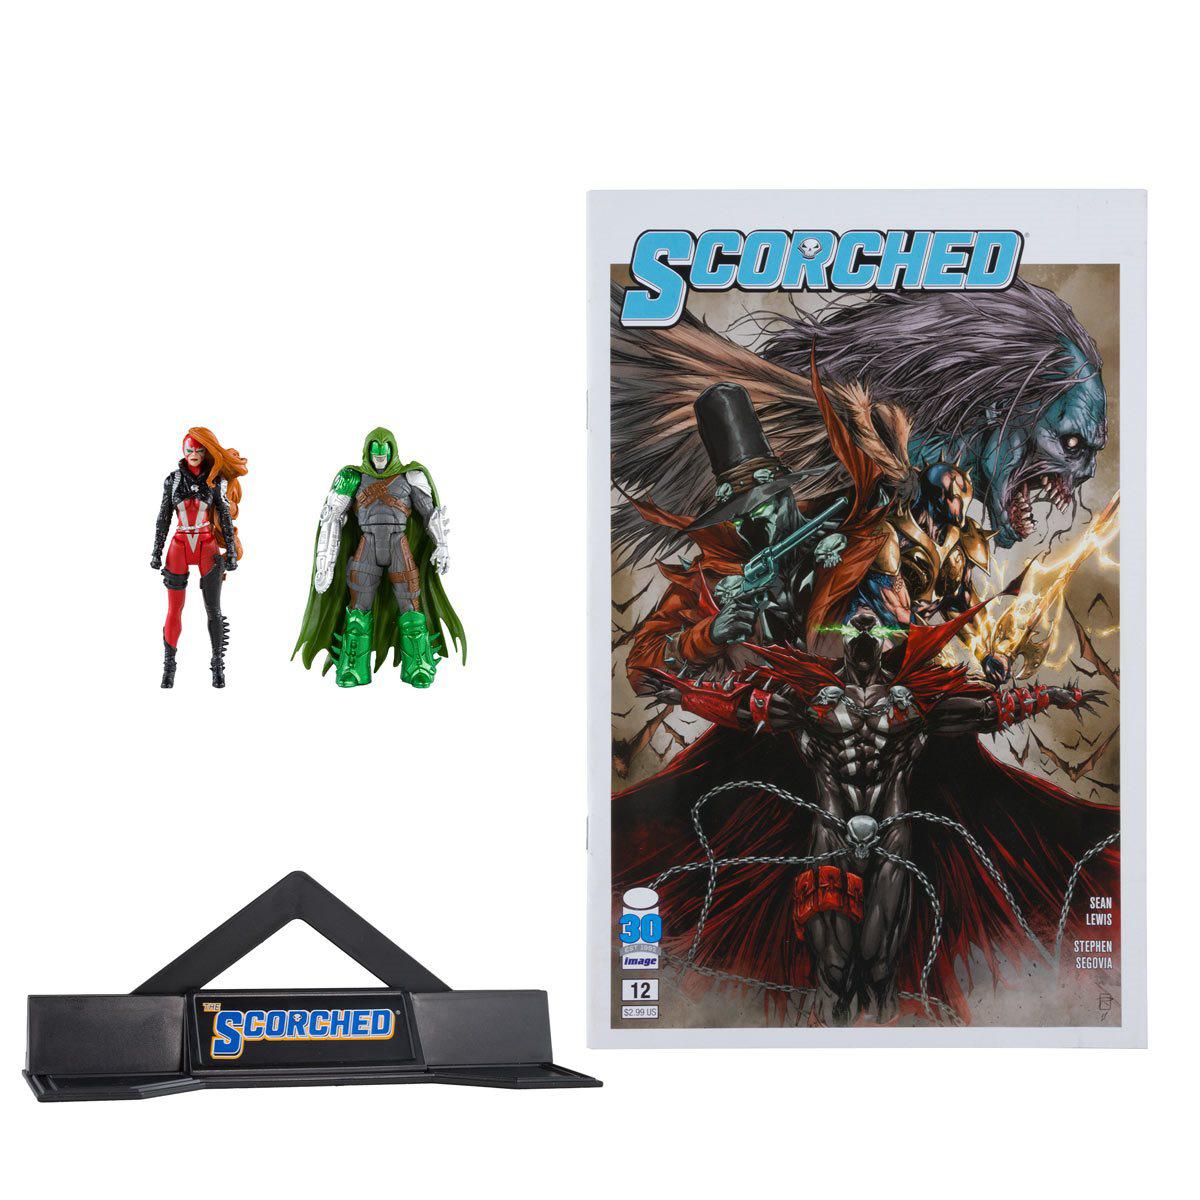 Page Punchers: She-Spawn and Curse (Scorched #12) - Actionfiguren & Comic - 8 cm-Actionfiguren-McFarlane Toys-Mighty Underground